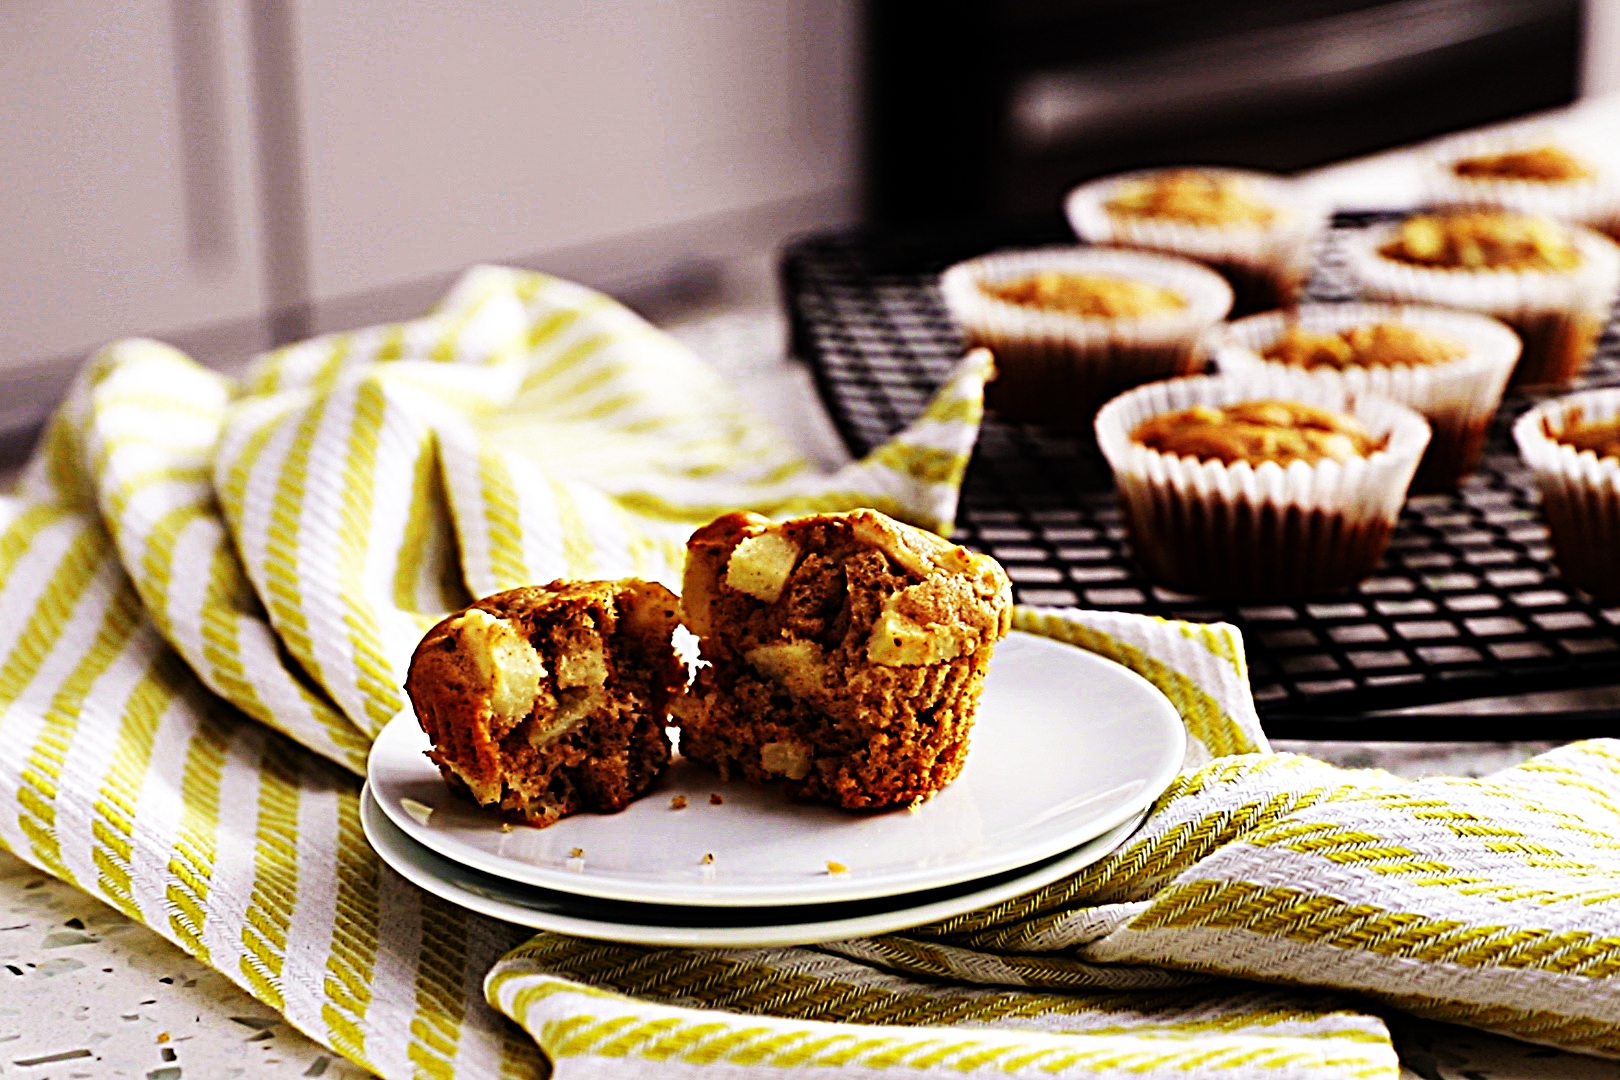 Stupid-Easy Recipe for Apple Cinnamon Muffins (#1 Top-Rated)